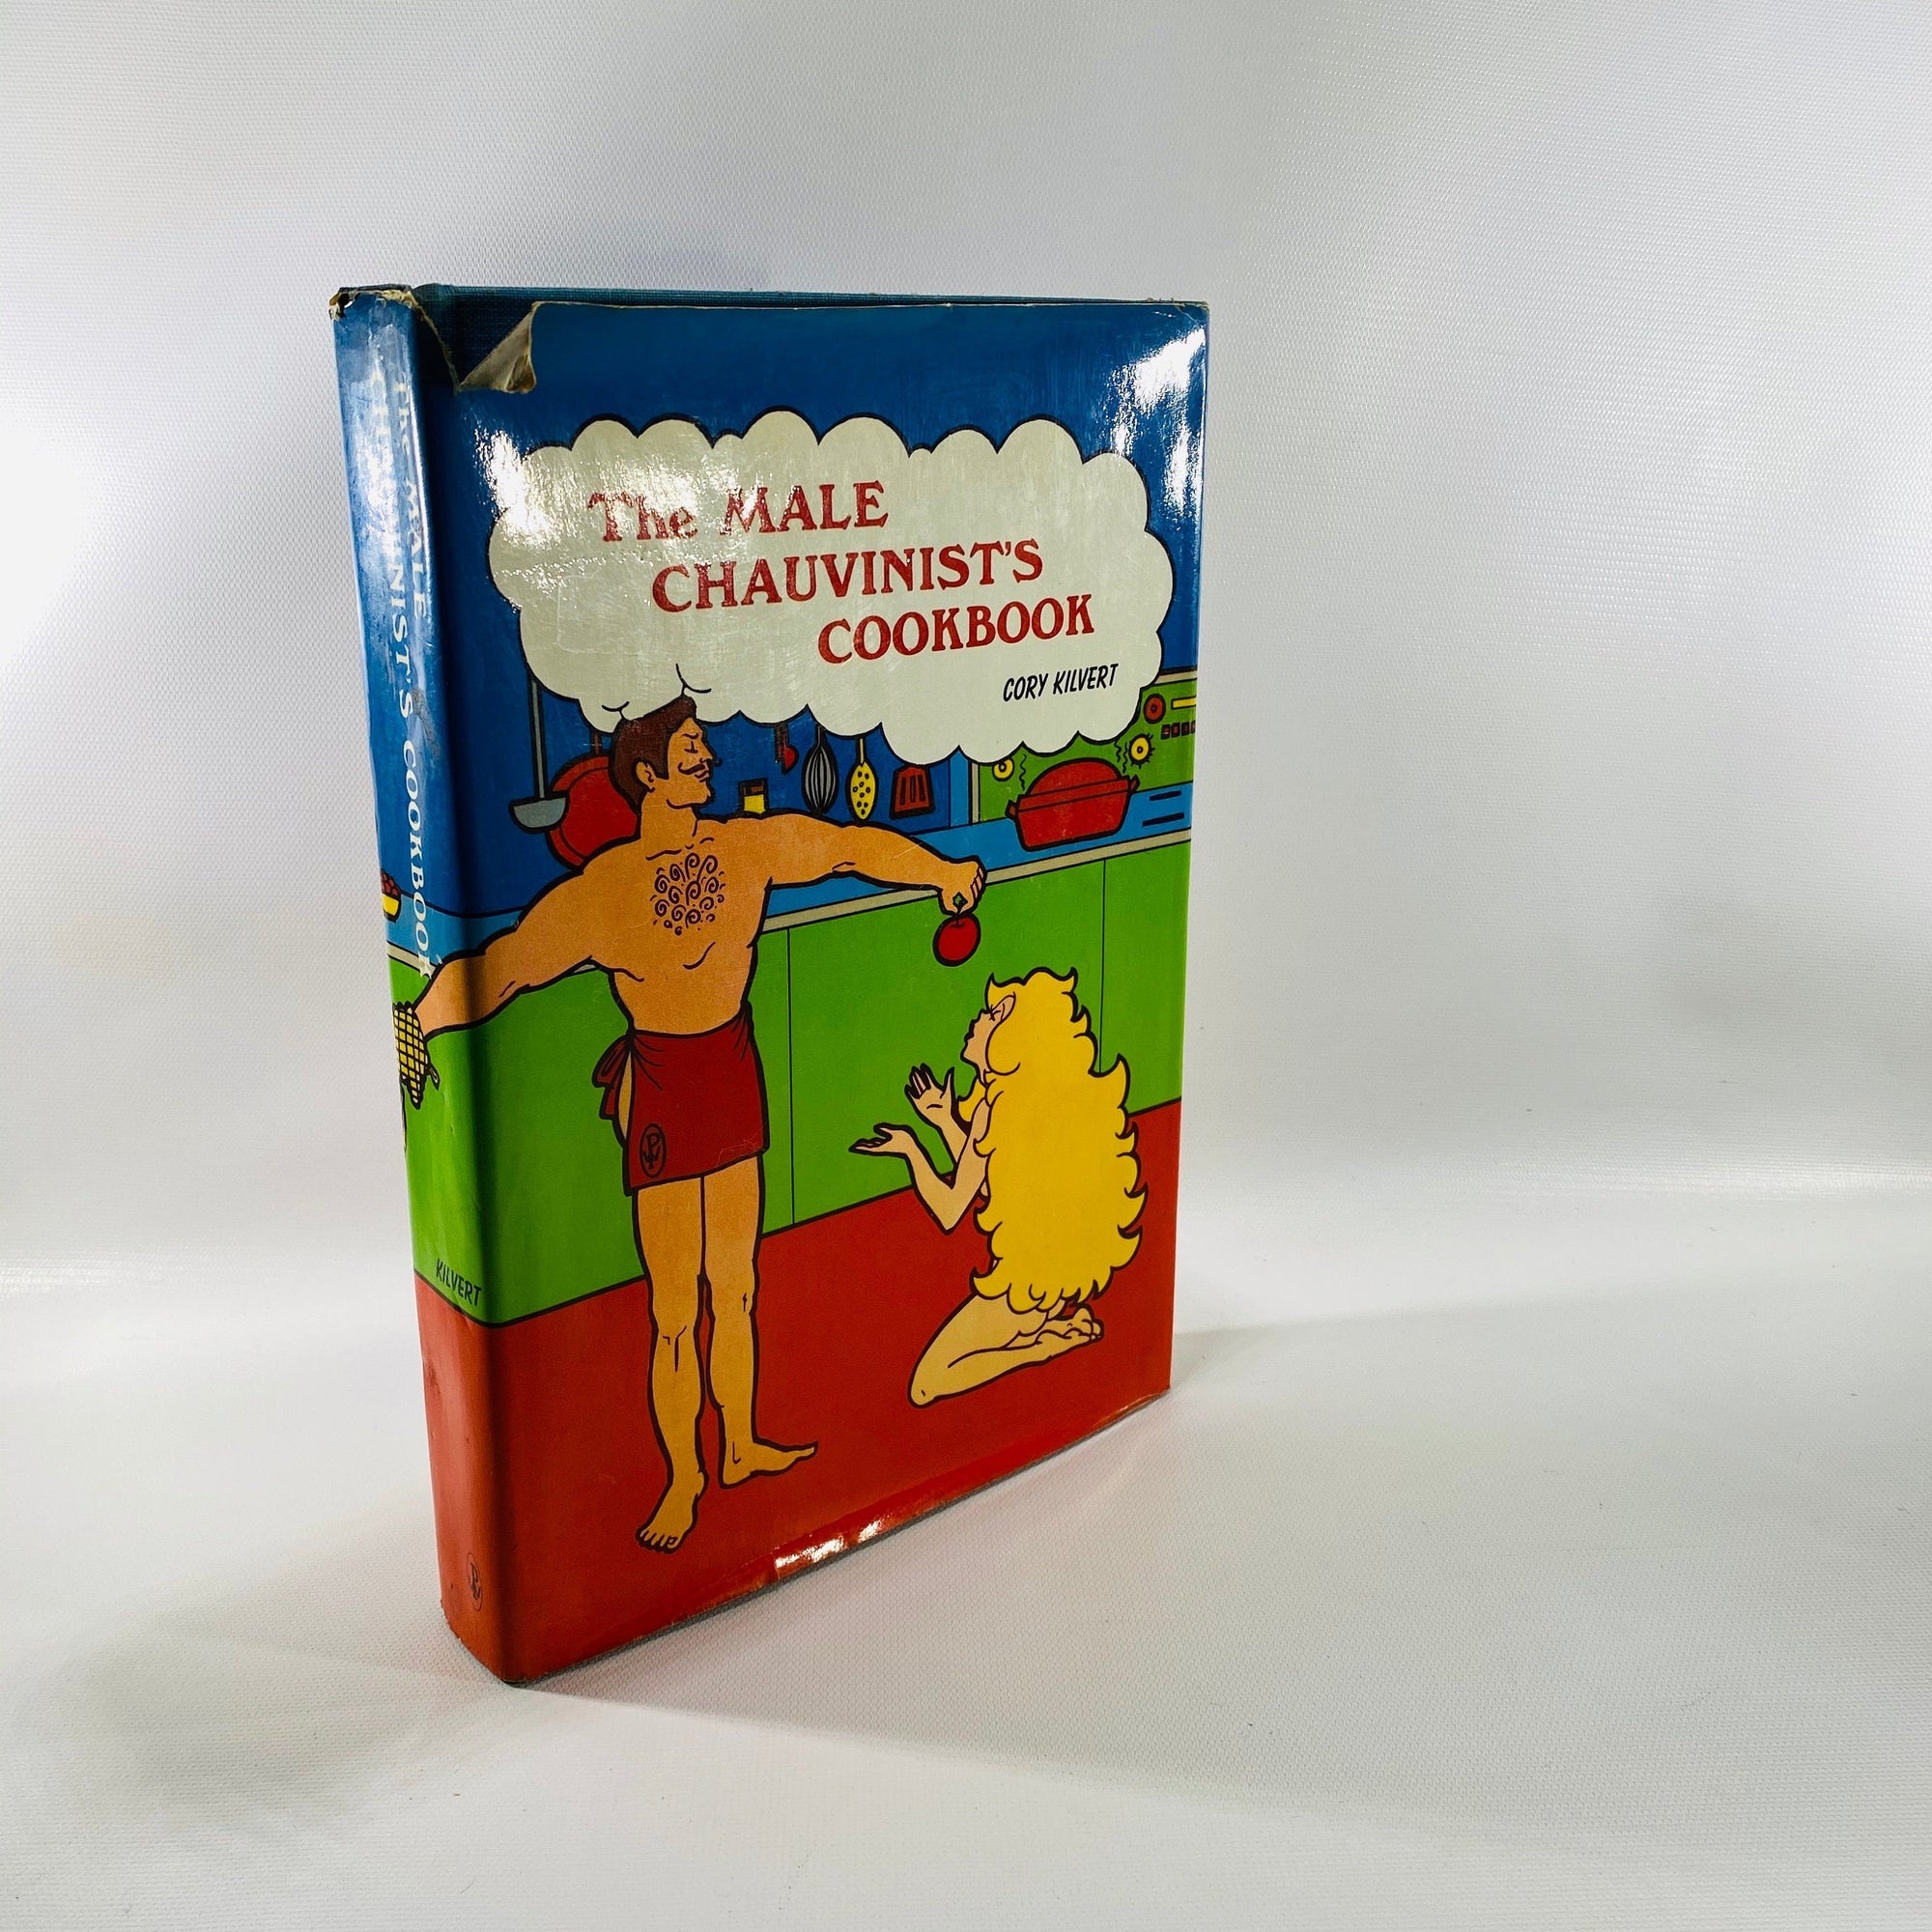 The Male Chauvinist's Cookbook by Cory Kilvert 1974  Vintage Cookbook